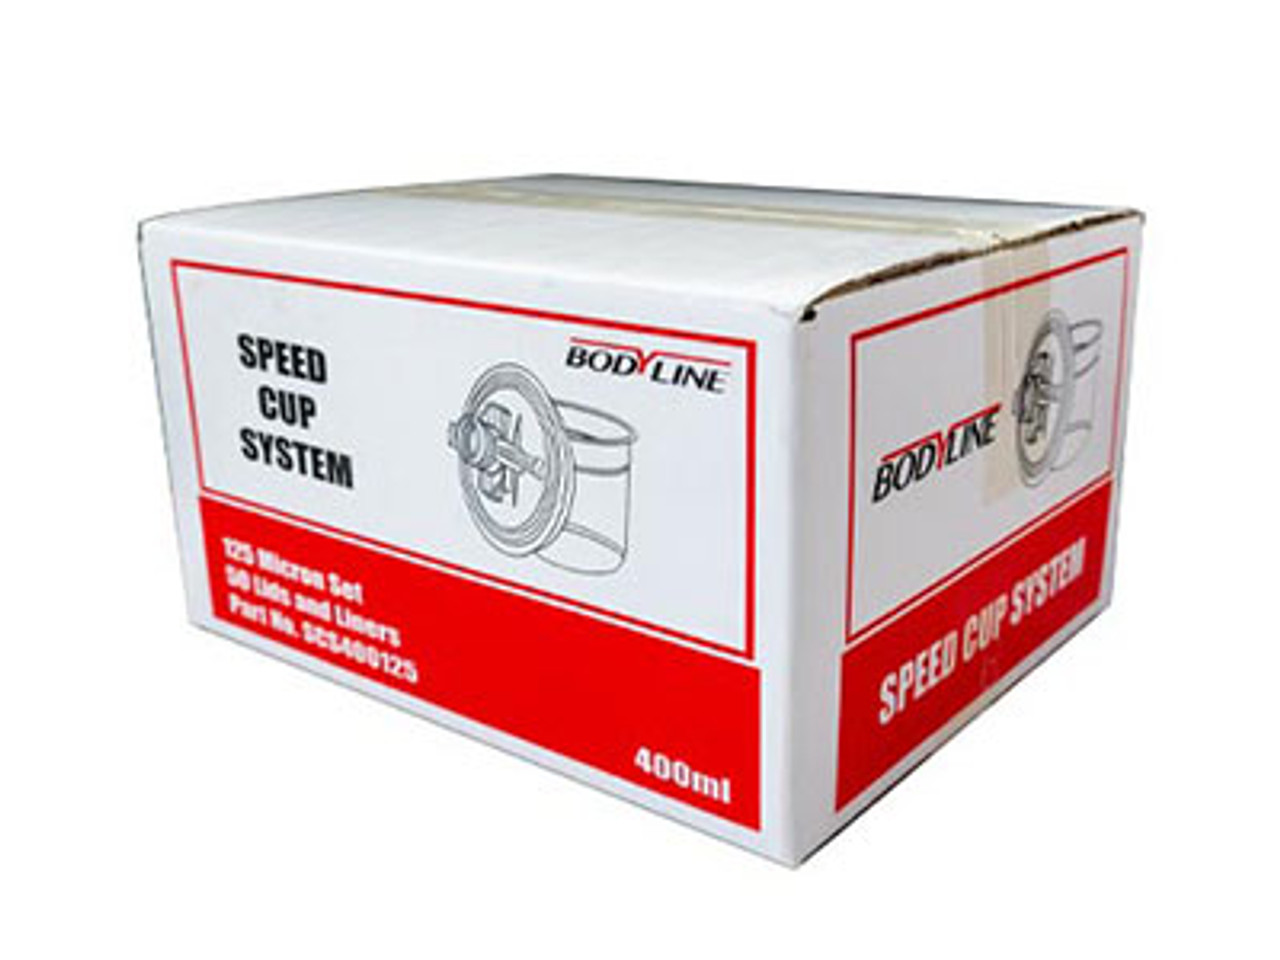 Bodyline Speed Cup System 400Ml Lid & Liner 125 Micron (50)